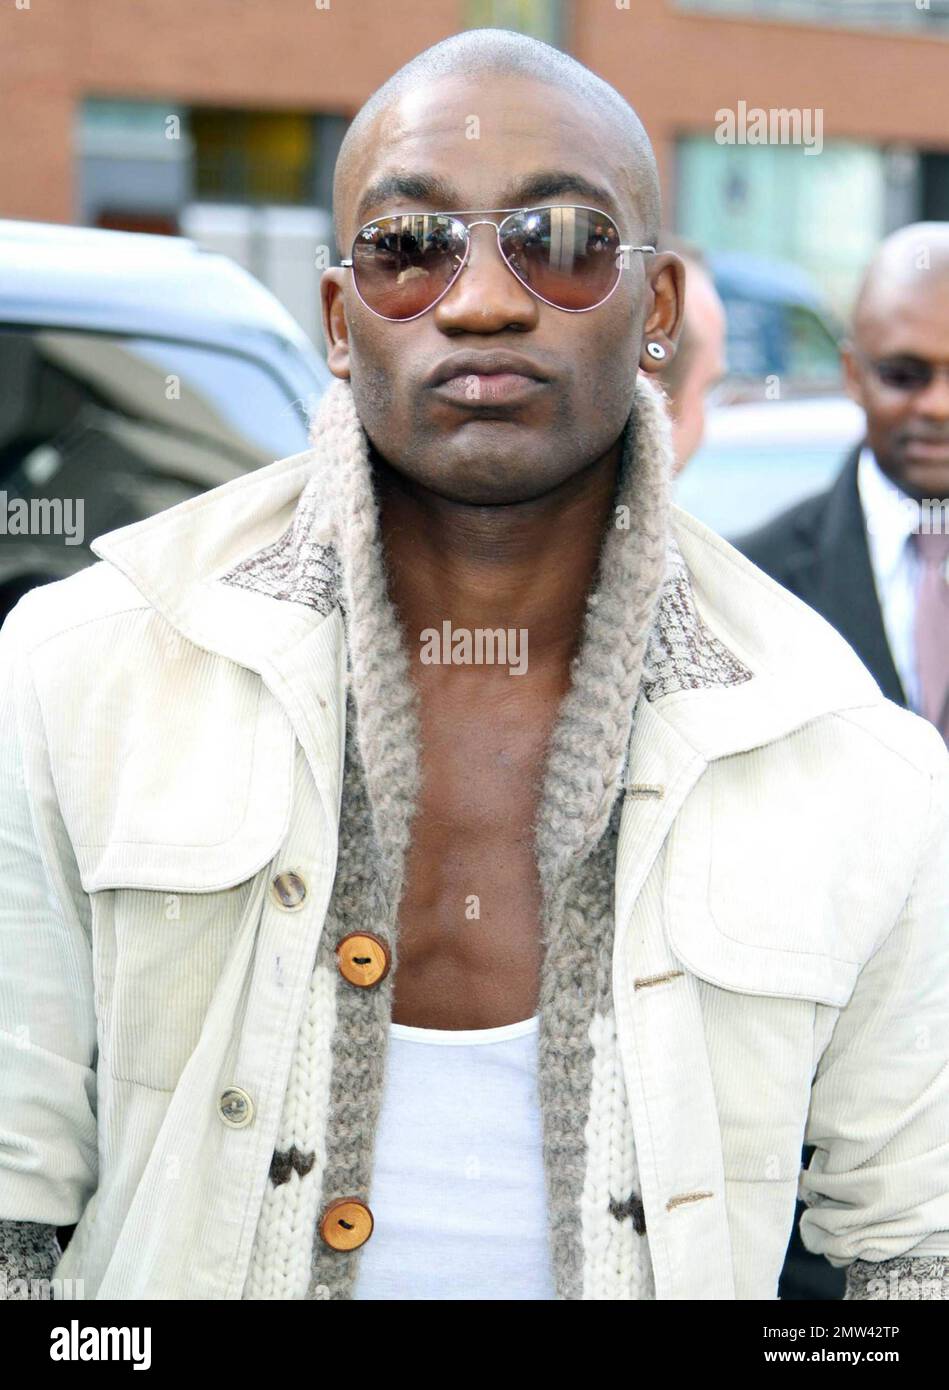 Kalvin Lamey of FYD, an 'X Factor' finalist band, leaves ITV studios after appearing on the morning talk show GMTV alongside other 'X Factor' contestants. London, UK. 10/07/10. Stock Photo